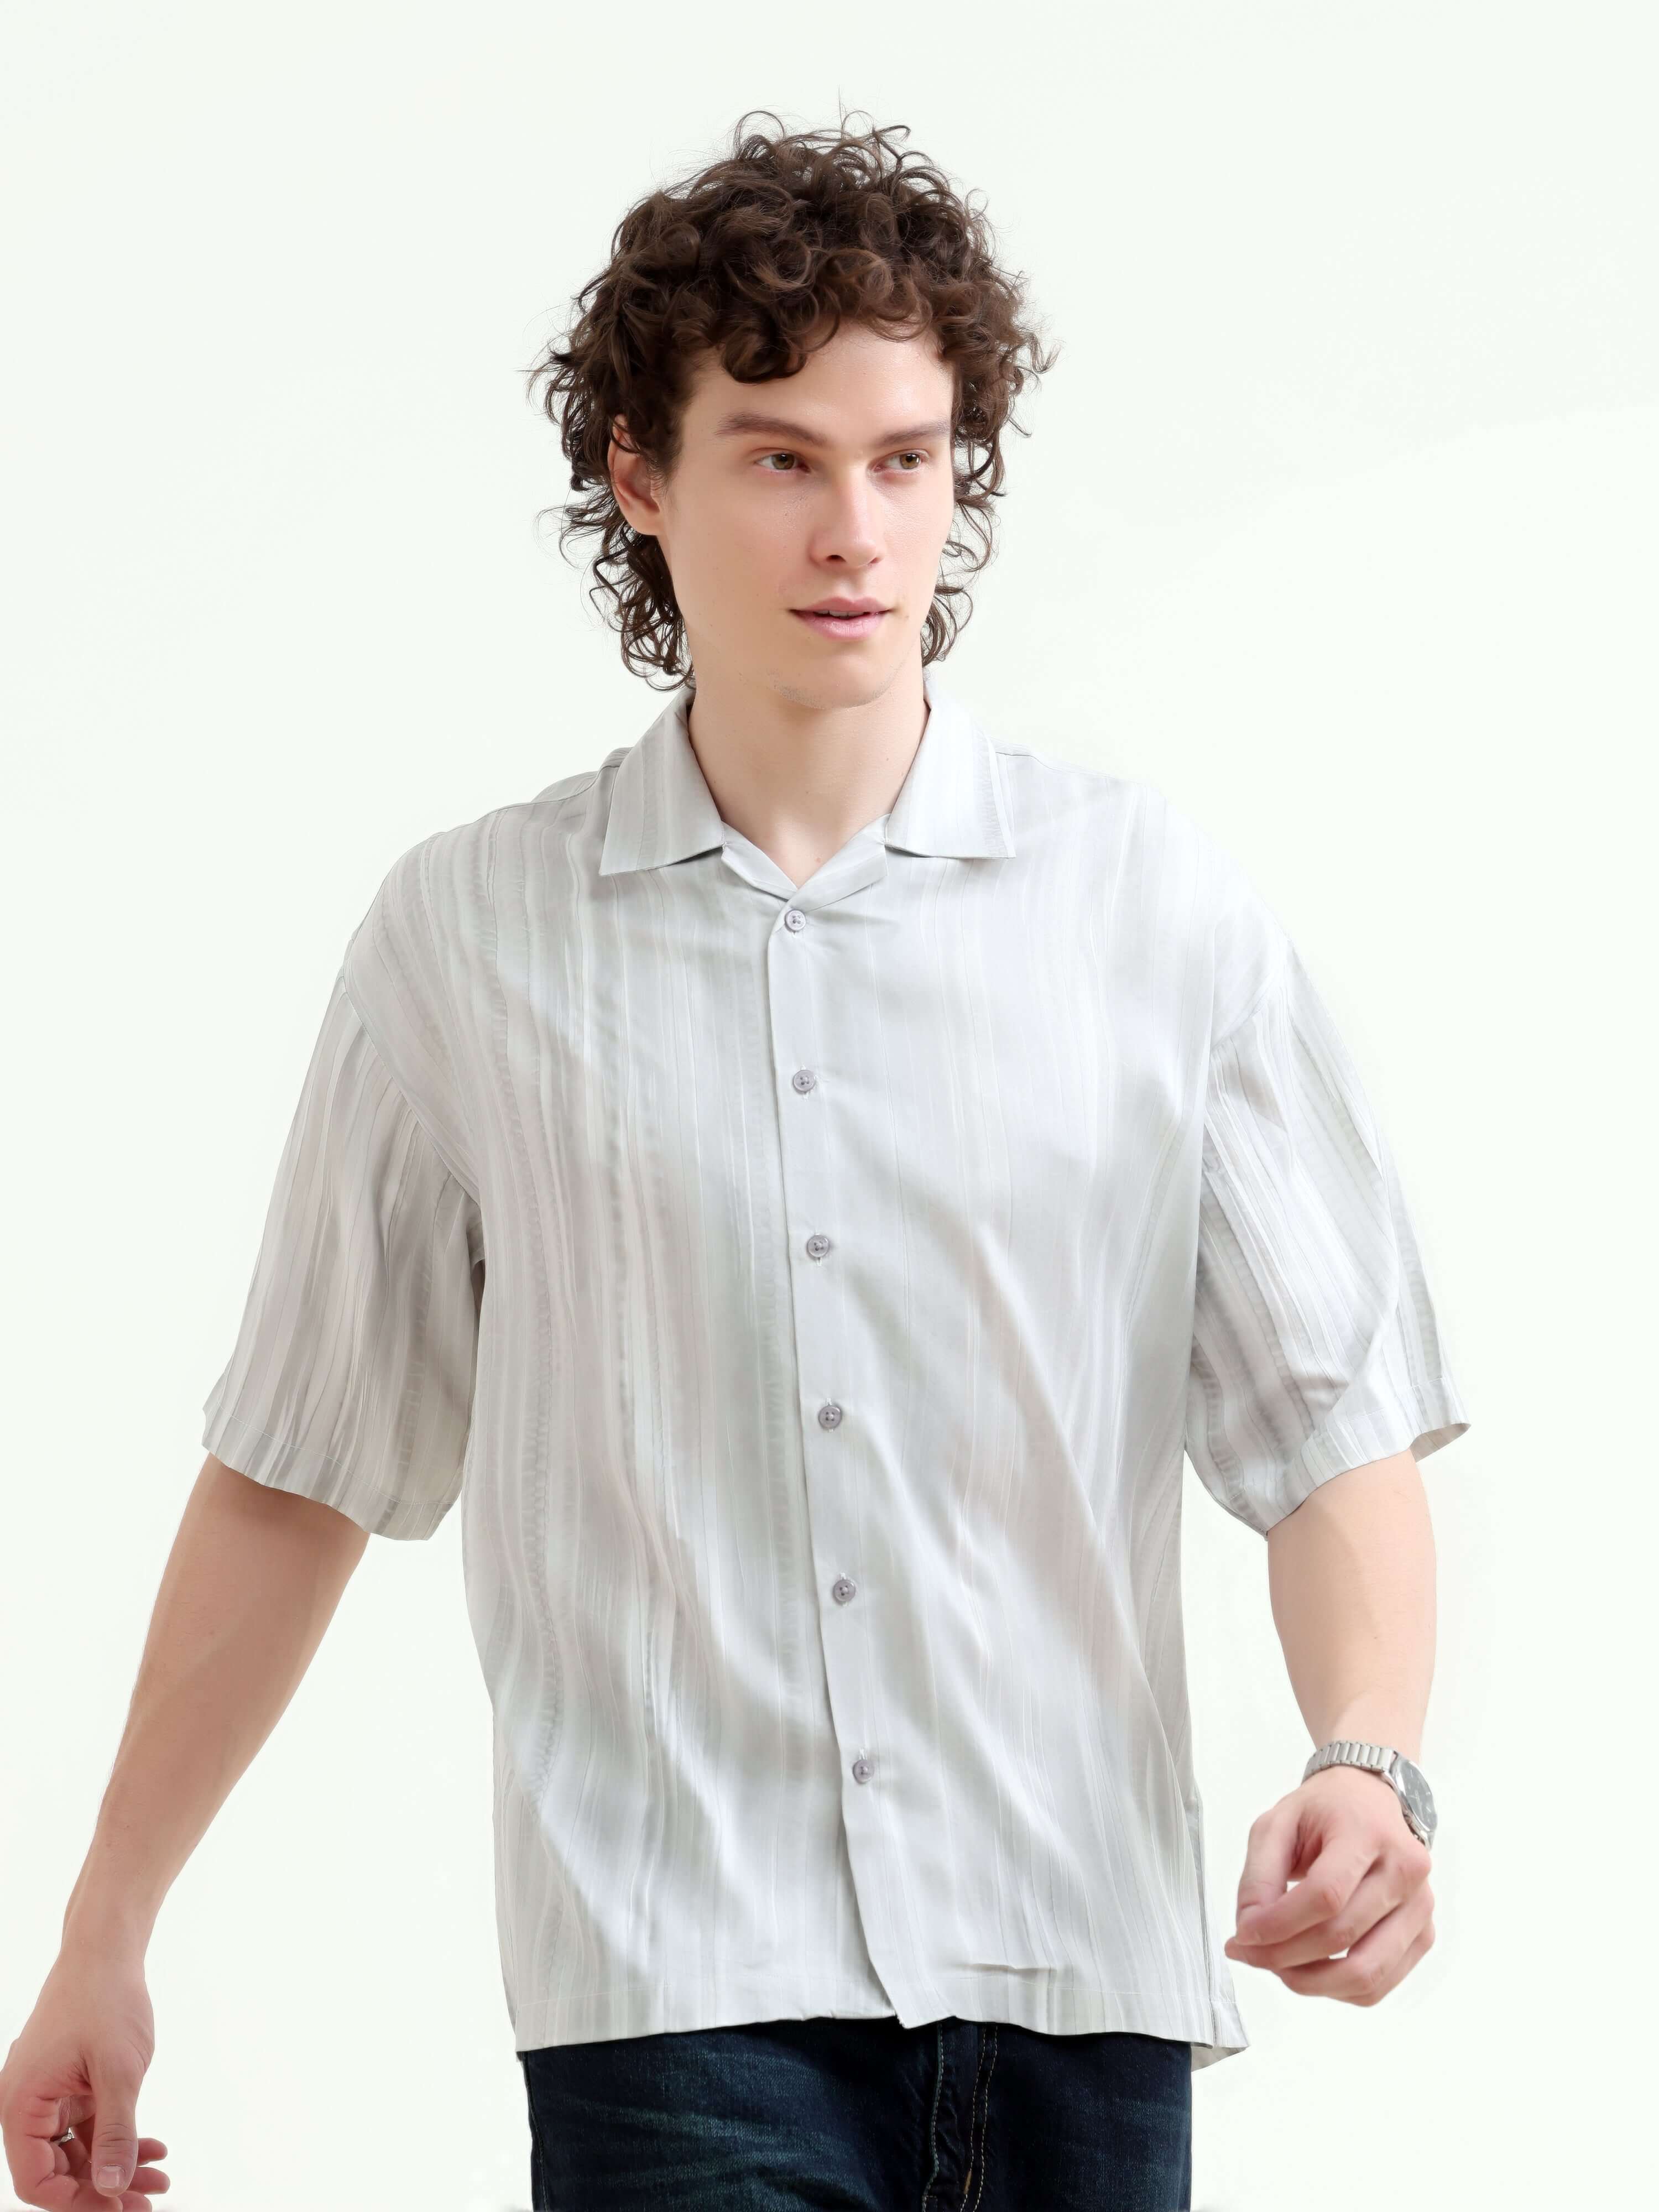 Men's Tonal Gray Oversized Shirt - New Arrival shop online at Estilocus. Embrace summer vibes with our men's lightweight, oversized shirt in tonal gray. Perfect for a casual yet stylish look. Shop new arrivals now!